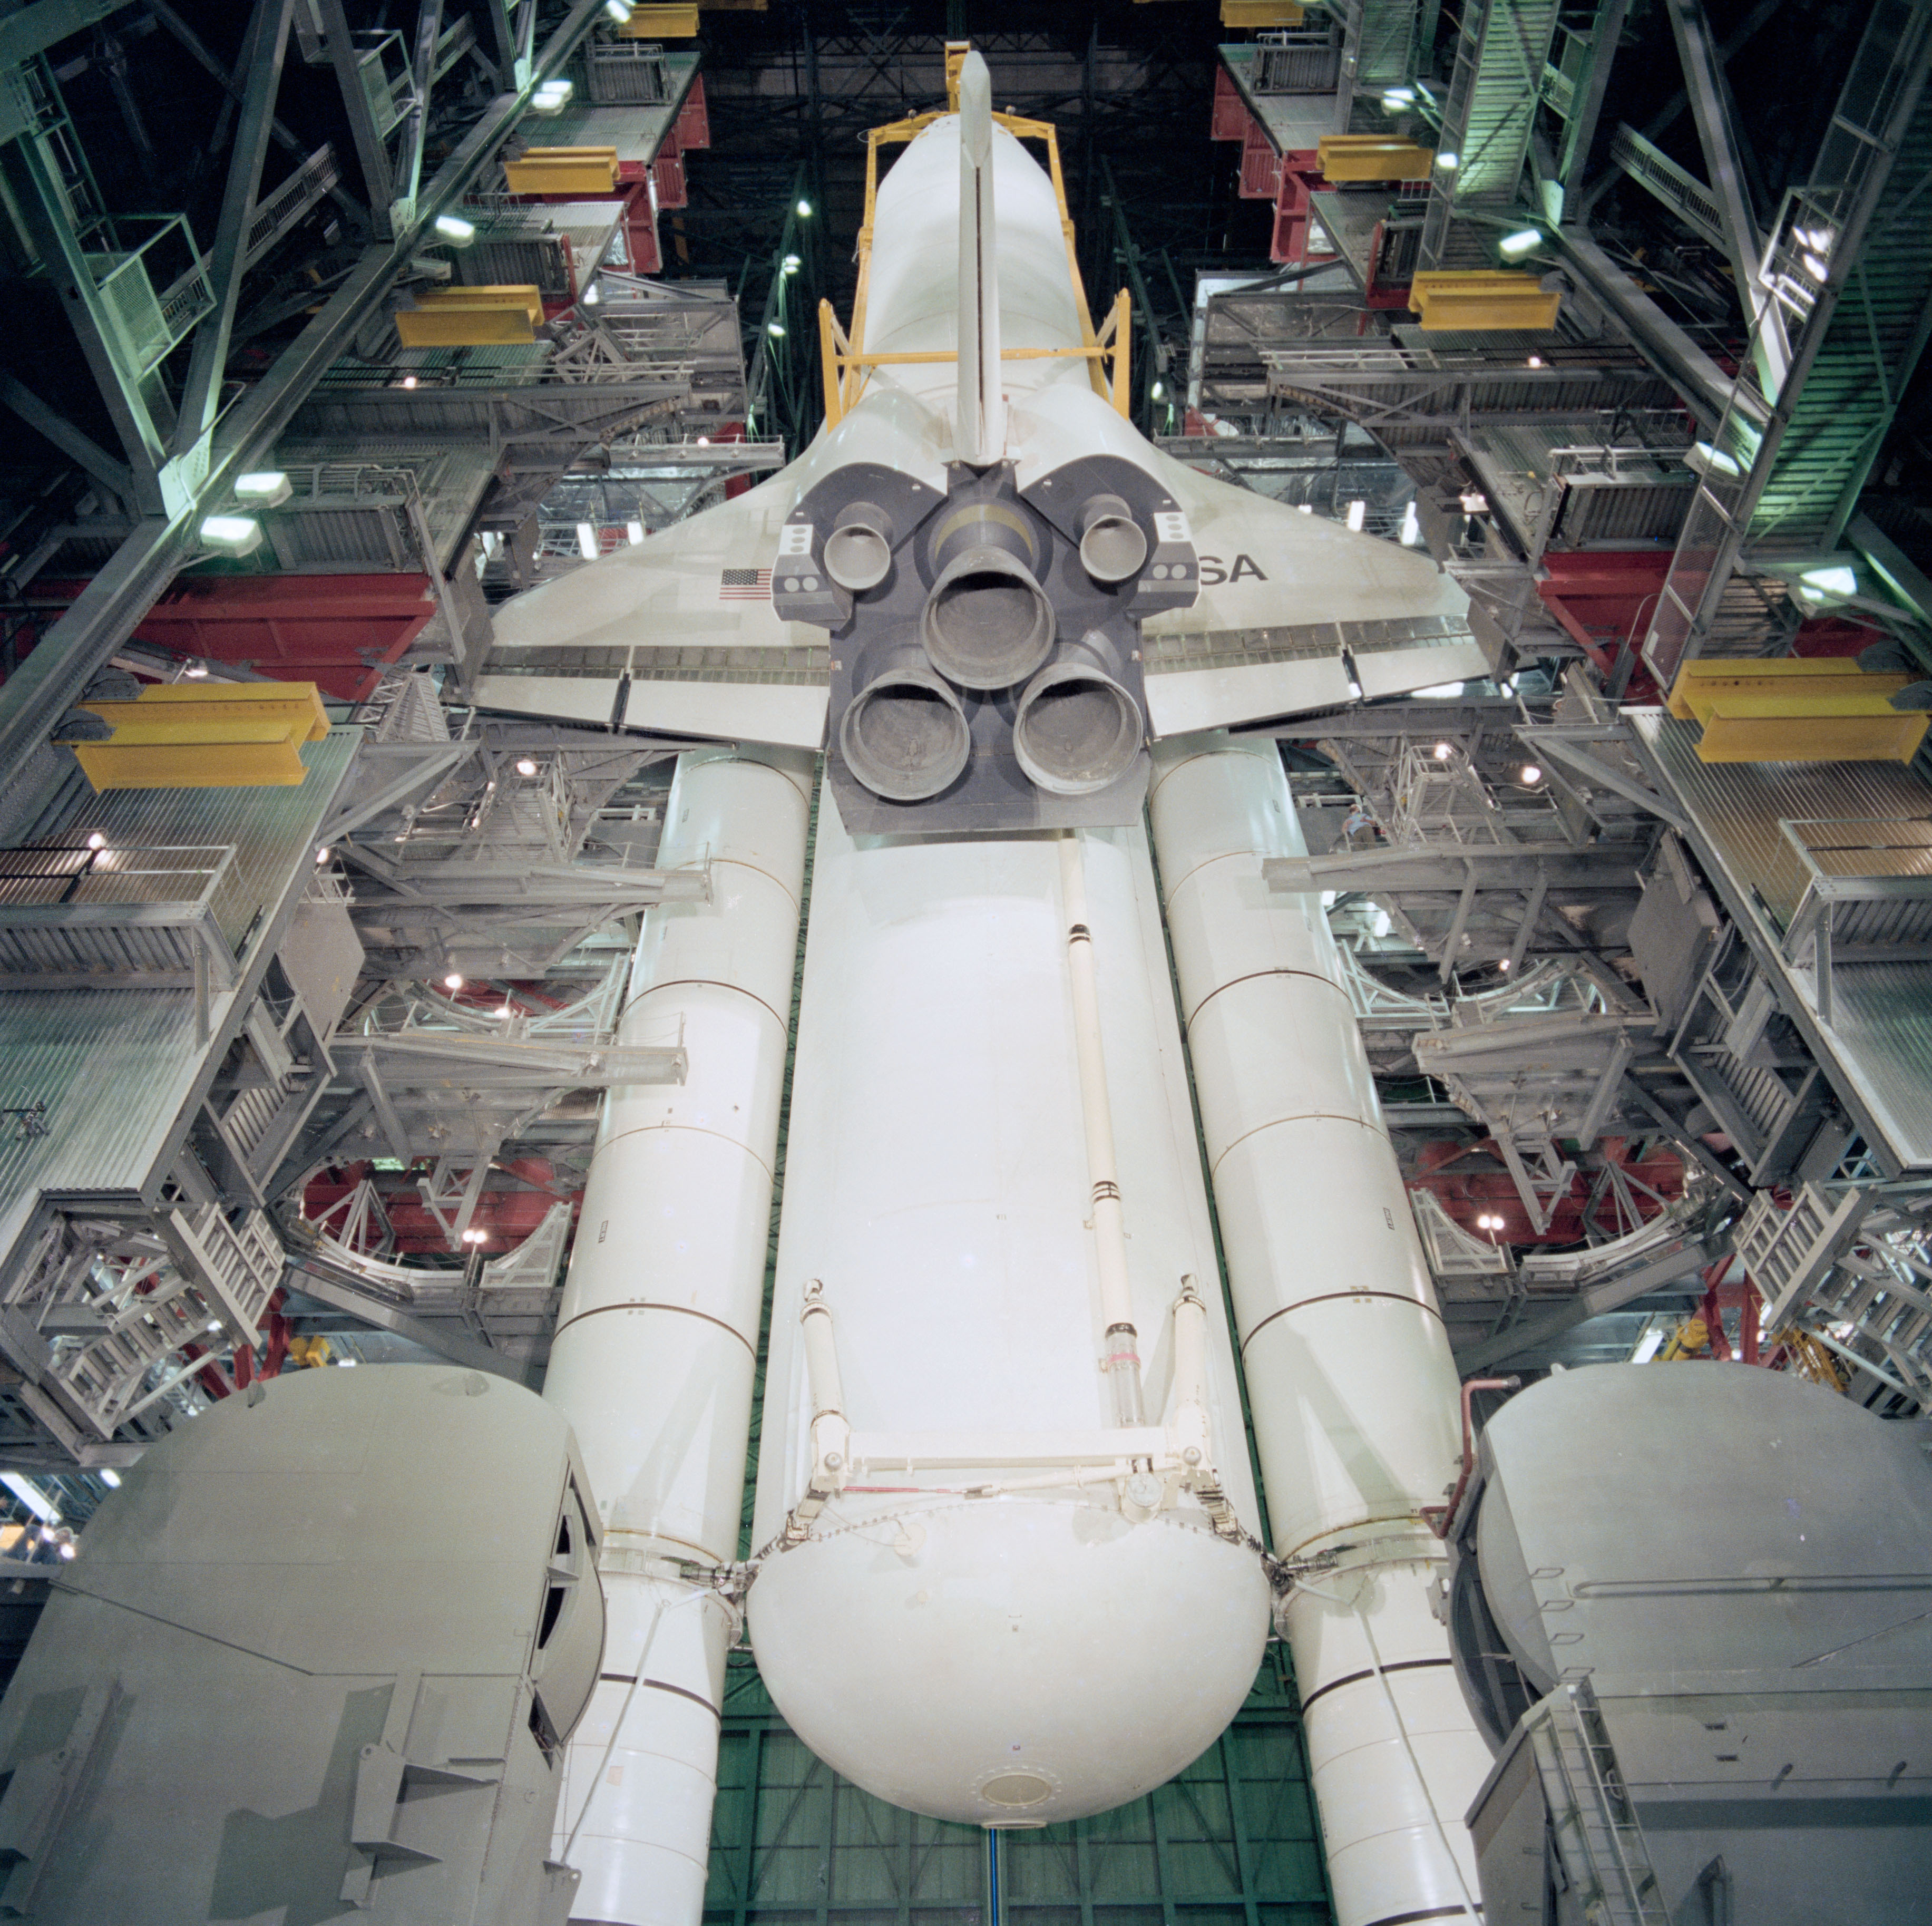 Workers lower Enterprise for attachment to the External Tank and Solid Rocket Boosters